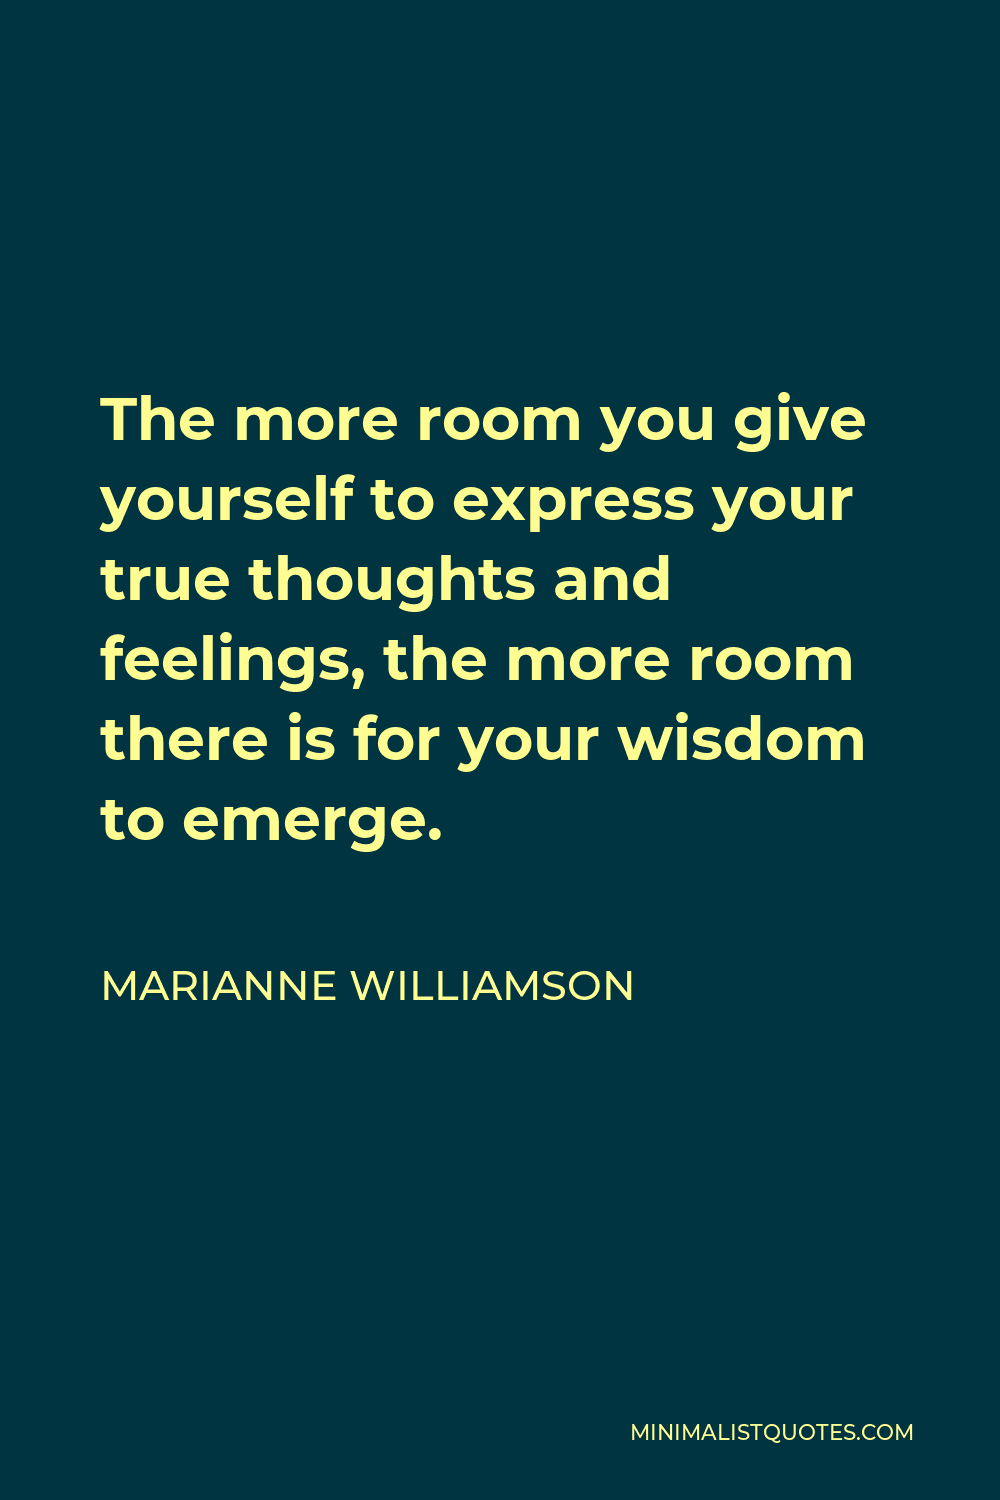 Marianne Williamson Quote - The more room you give yourself to express your true thoughts and feelings, the more room there is for your wisdom to emerge.